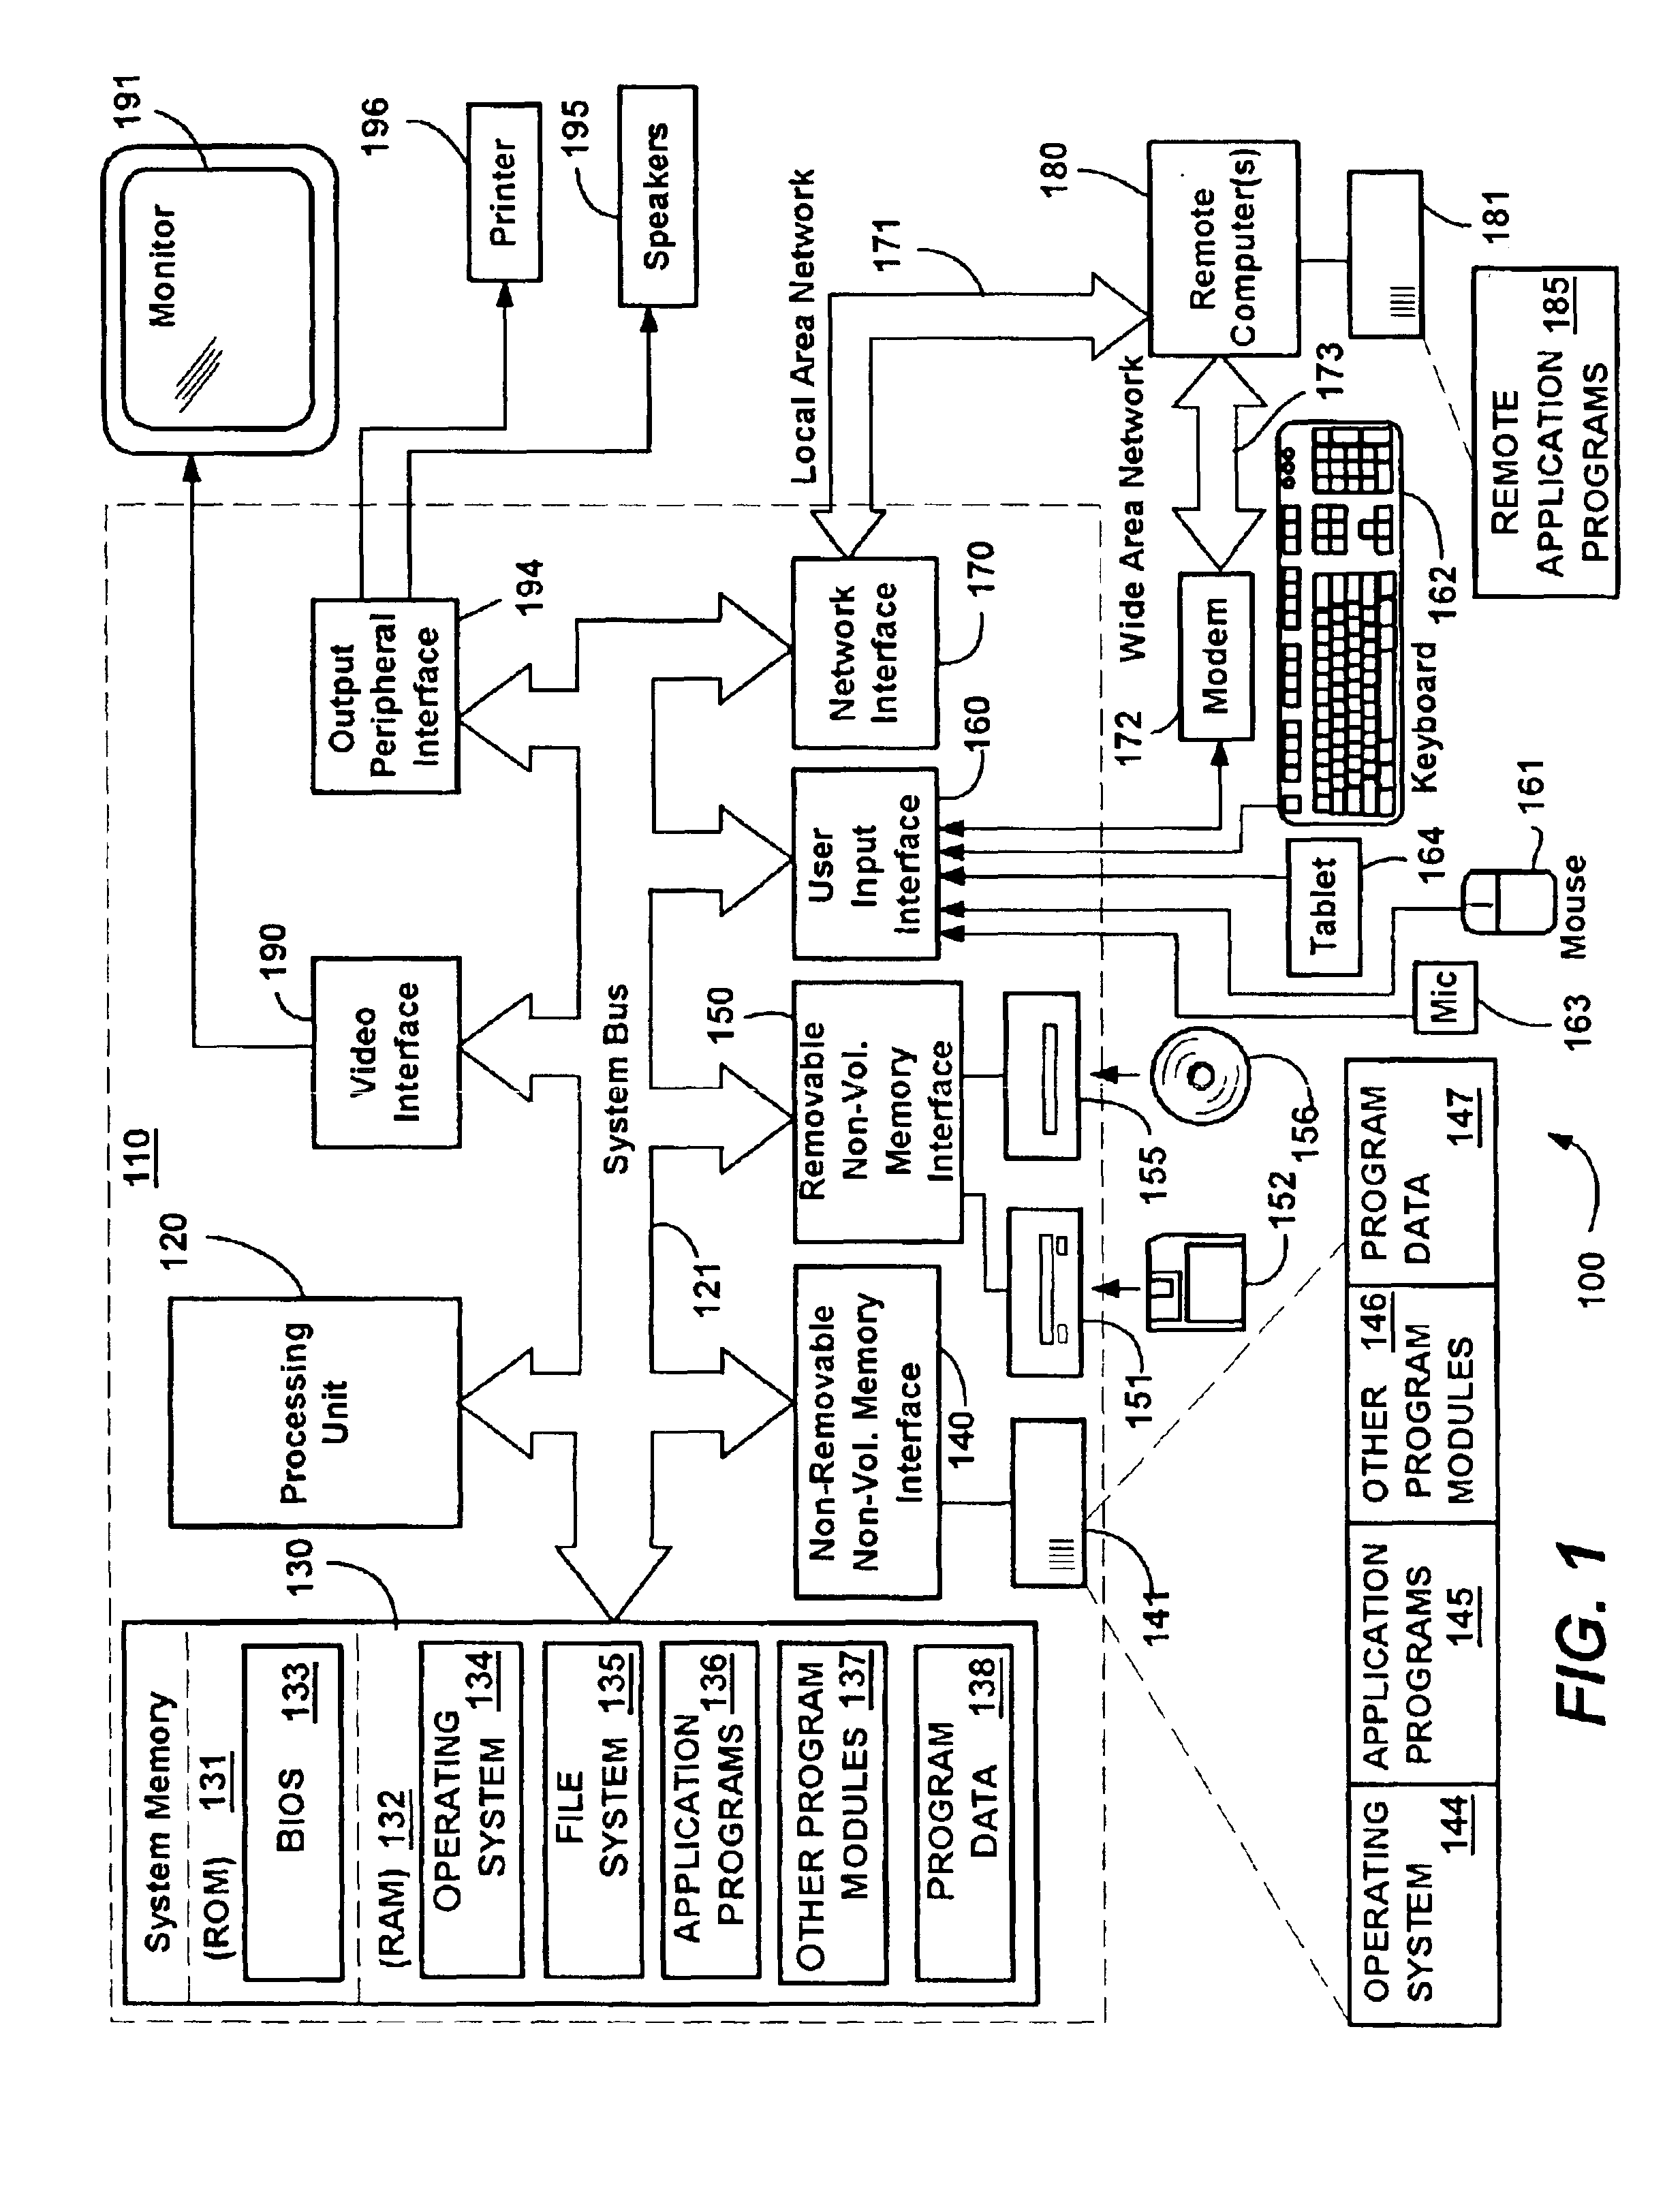 Multiple-level graphics processing system and method